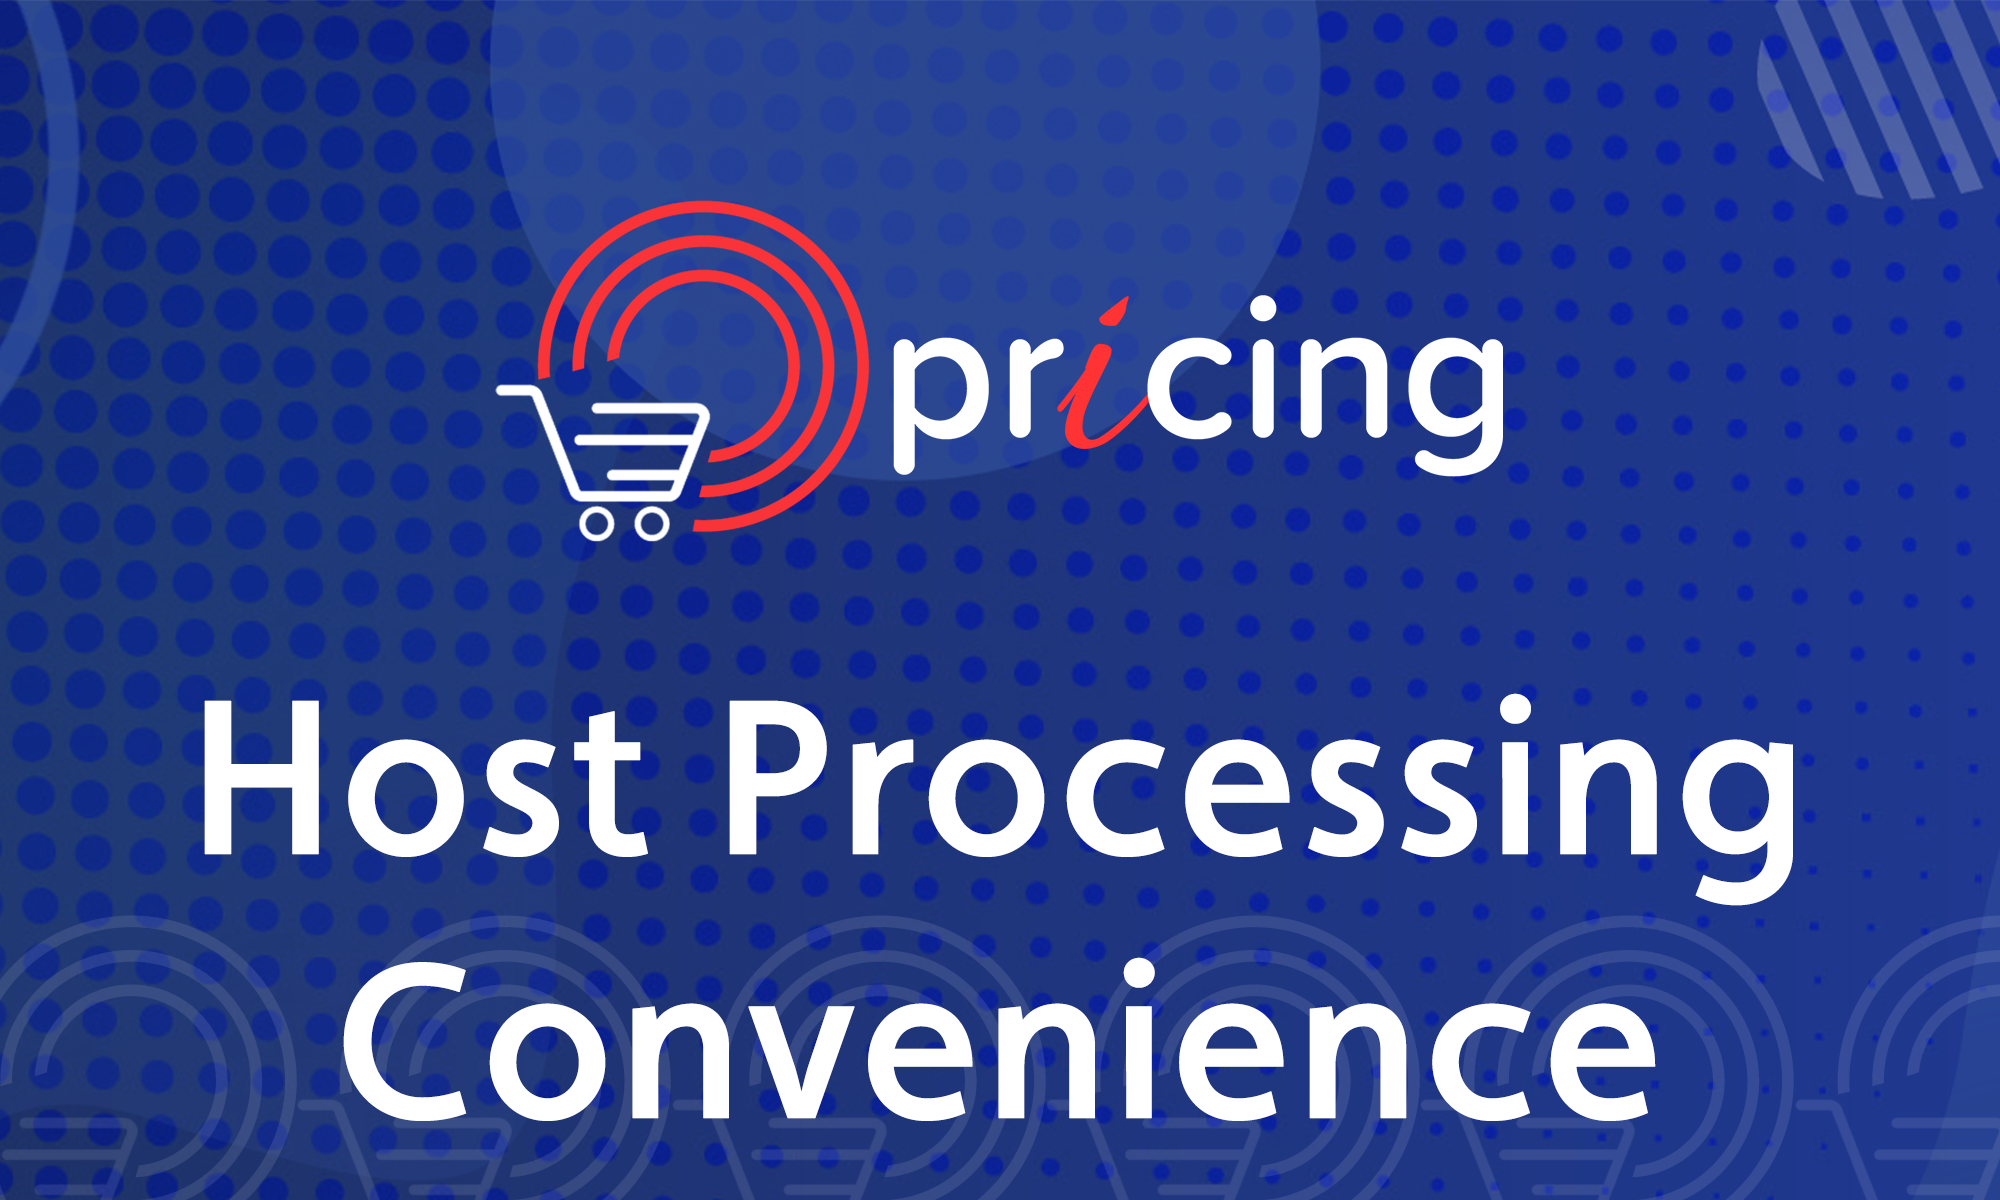 Featured image for “Convenience Host Processing”